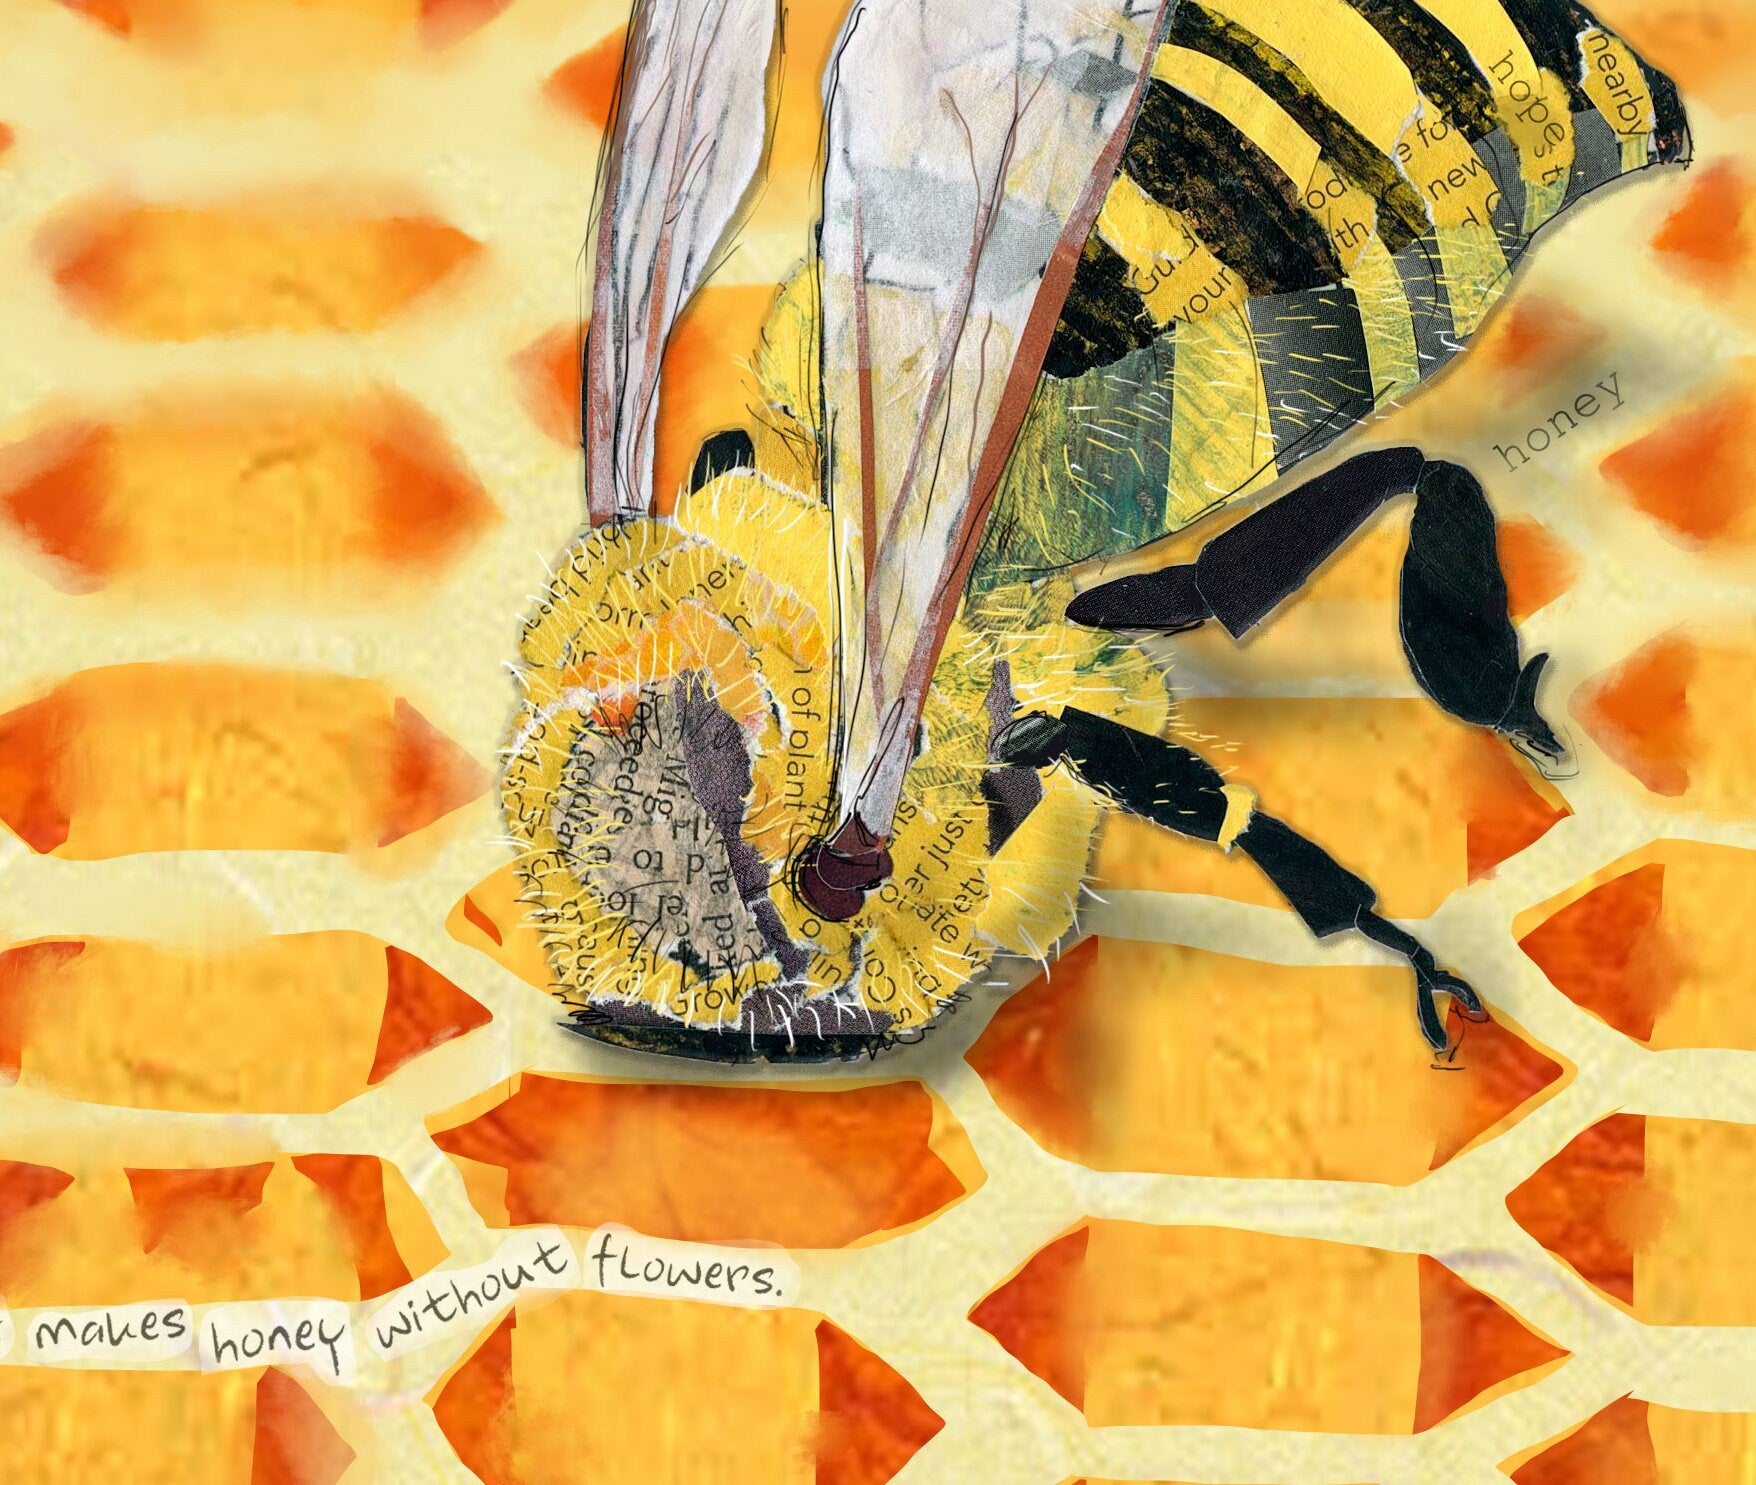 Greeting Card of mixed media collage of a honeybee with its head deep inside a honey comb cell, inspirational quote, hope - Blank Inside